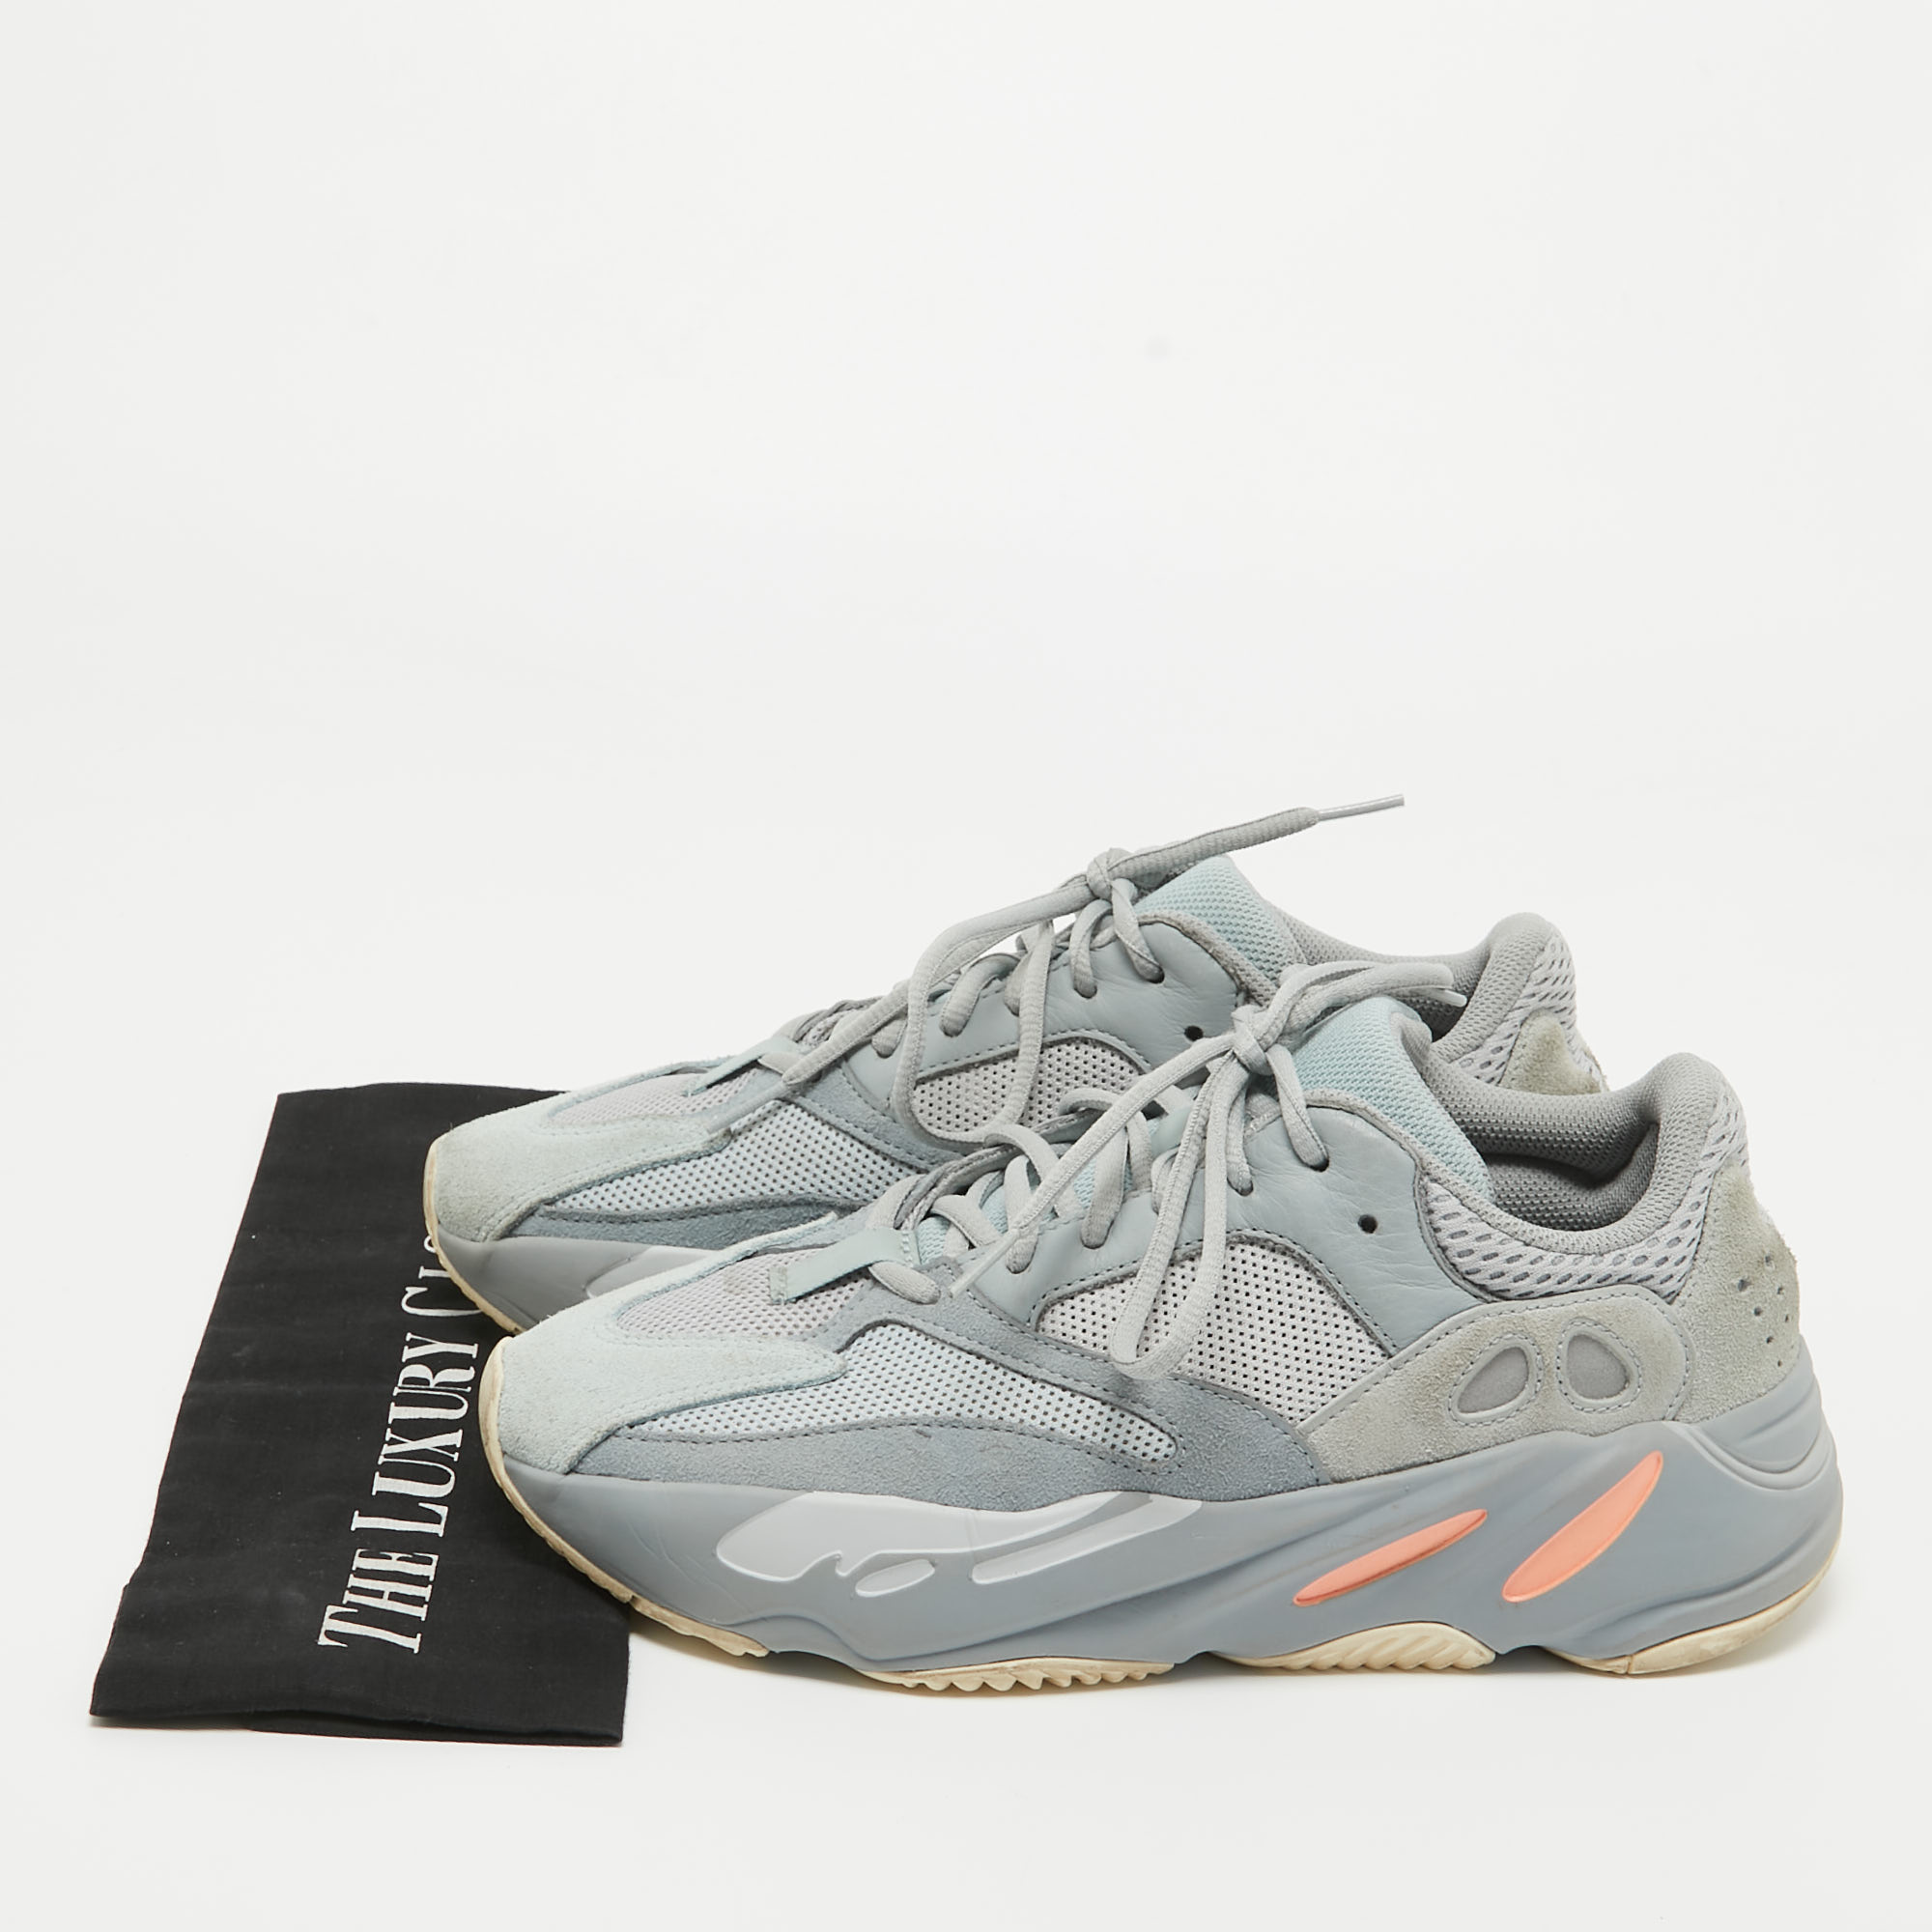 Yeezy X Adidas Grey/Blue Suede And Mesh Boost 700 Inertia Sneakers Size 40 2/3